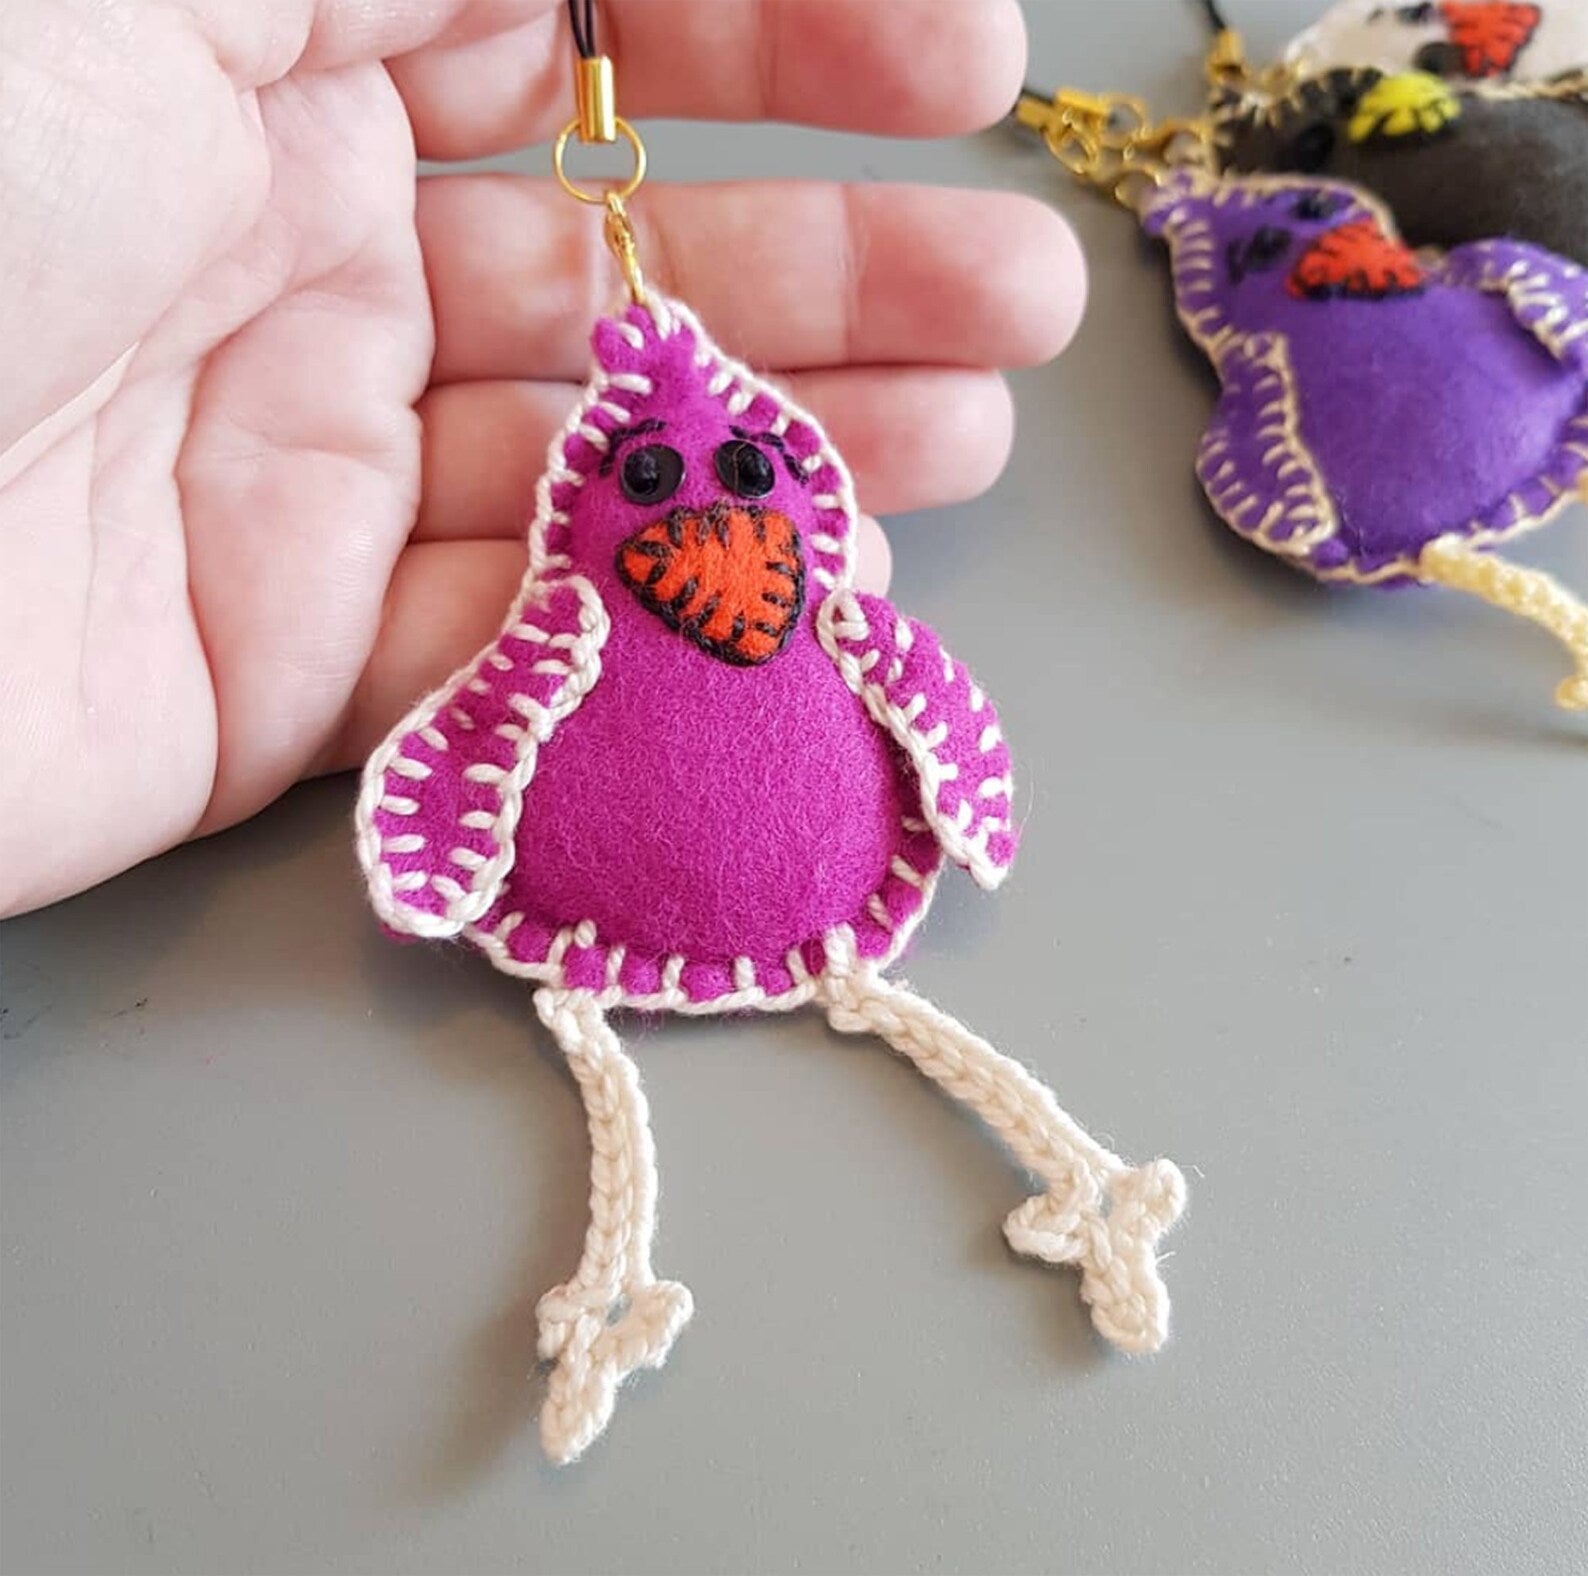 "Crafted to perfection by CocoFlower, our Felt Bird Keychain Plush is a must-have!"